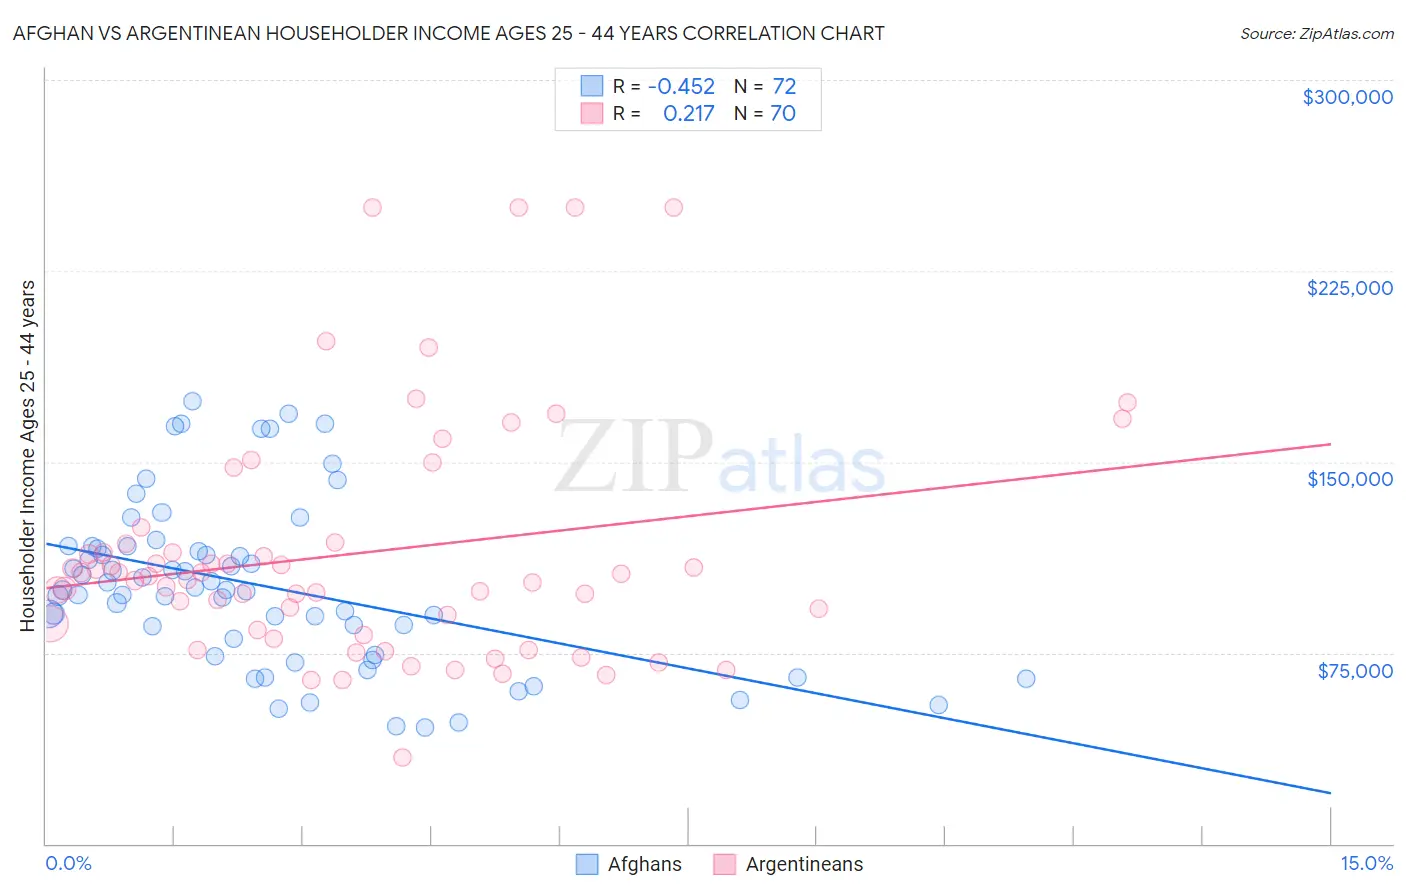 Afghan vs Argentinean Householder Income Ages 25 - 44 years